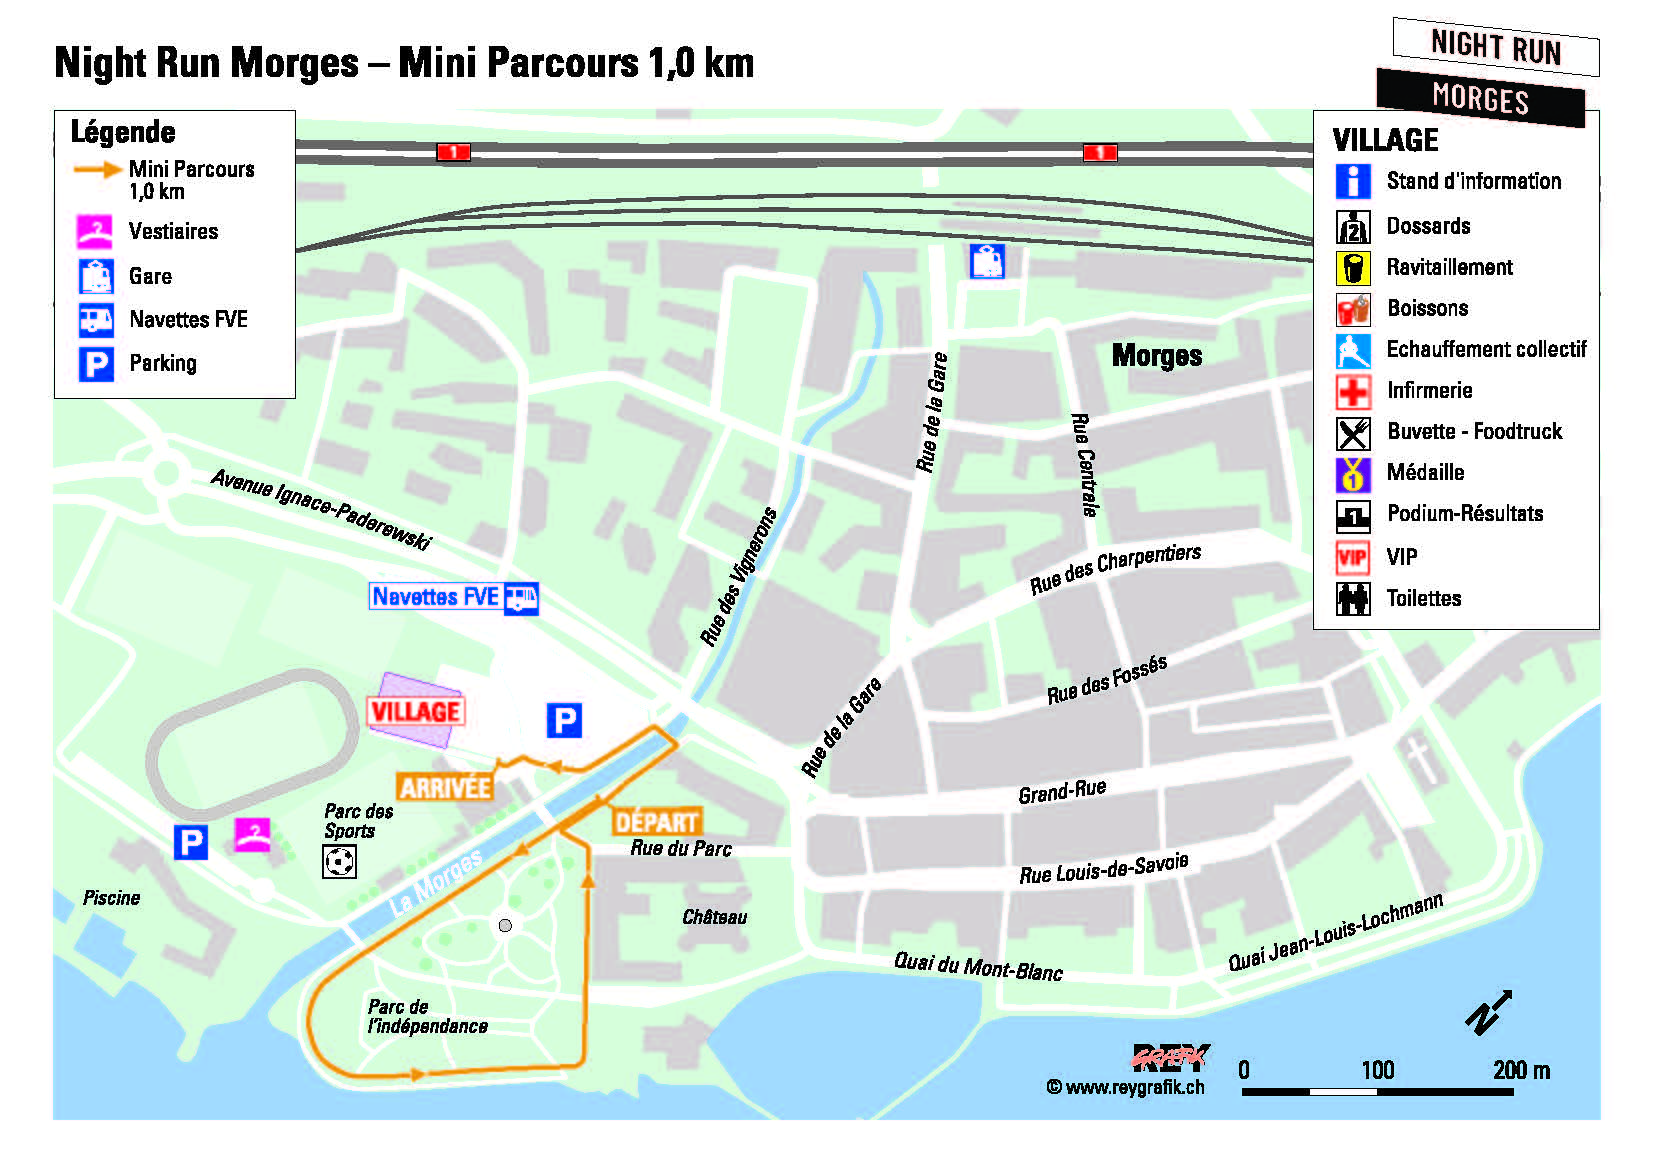 Parcours 1km Night Run Morges